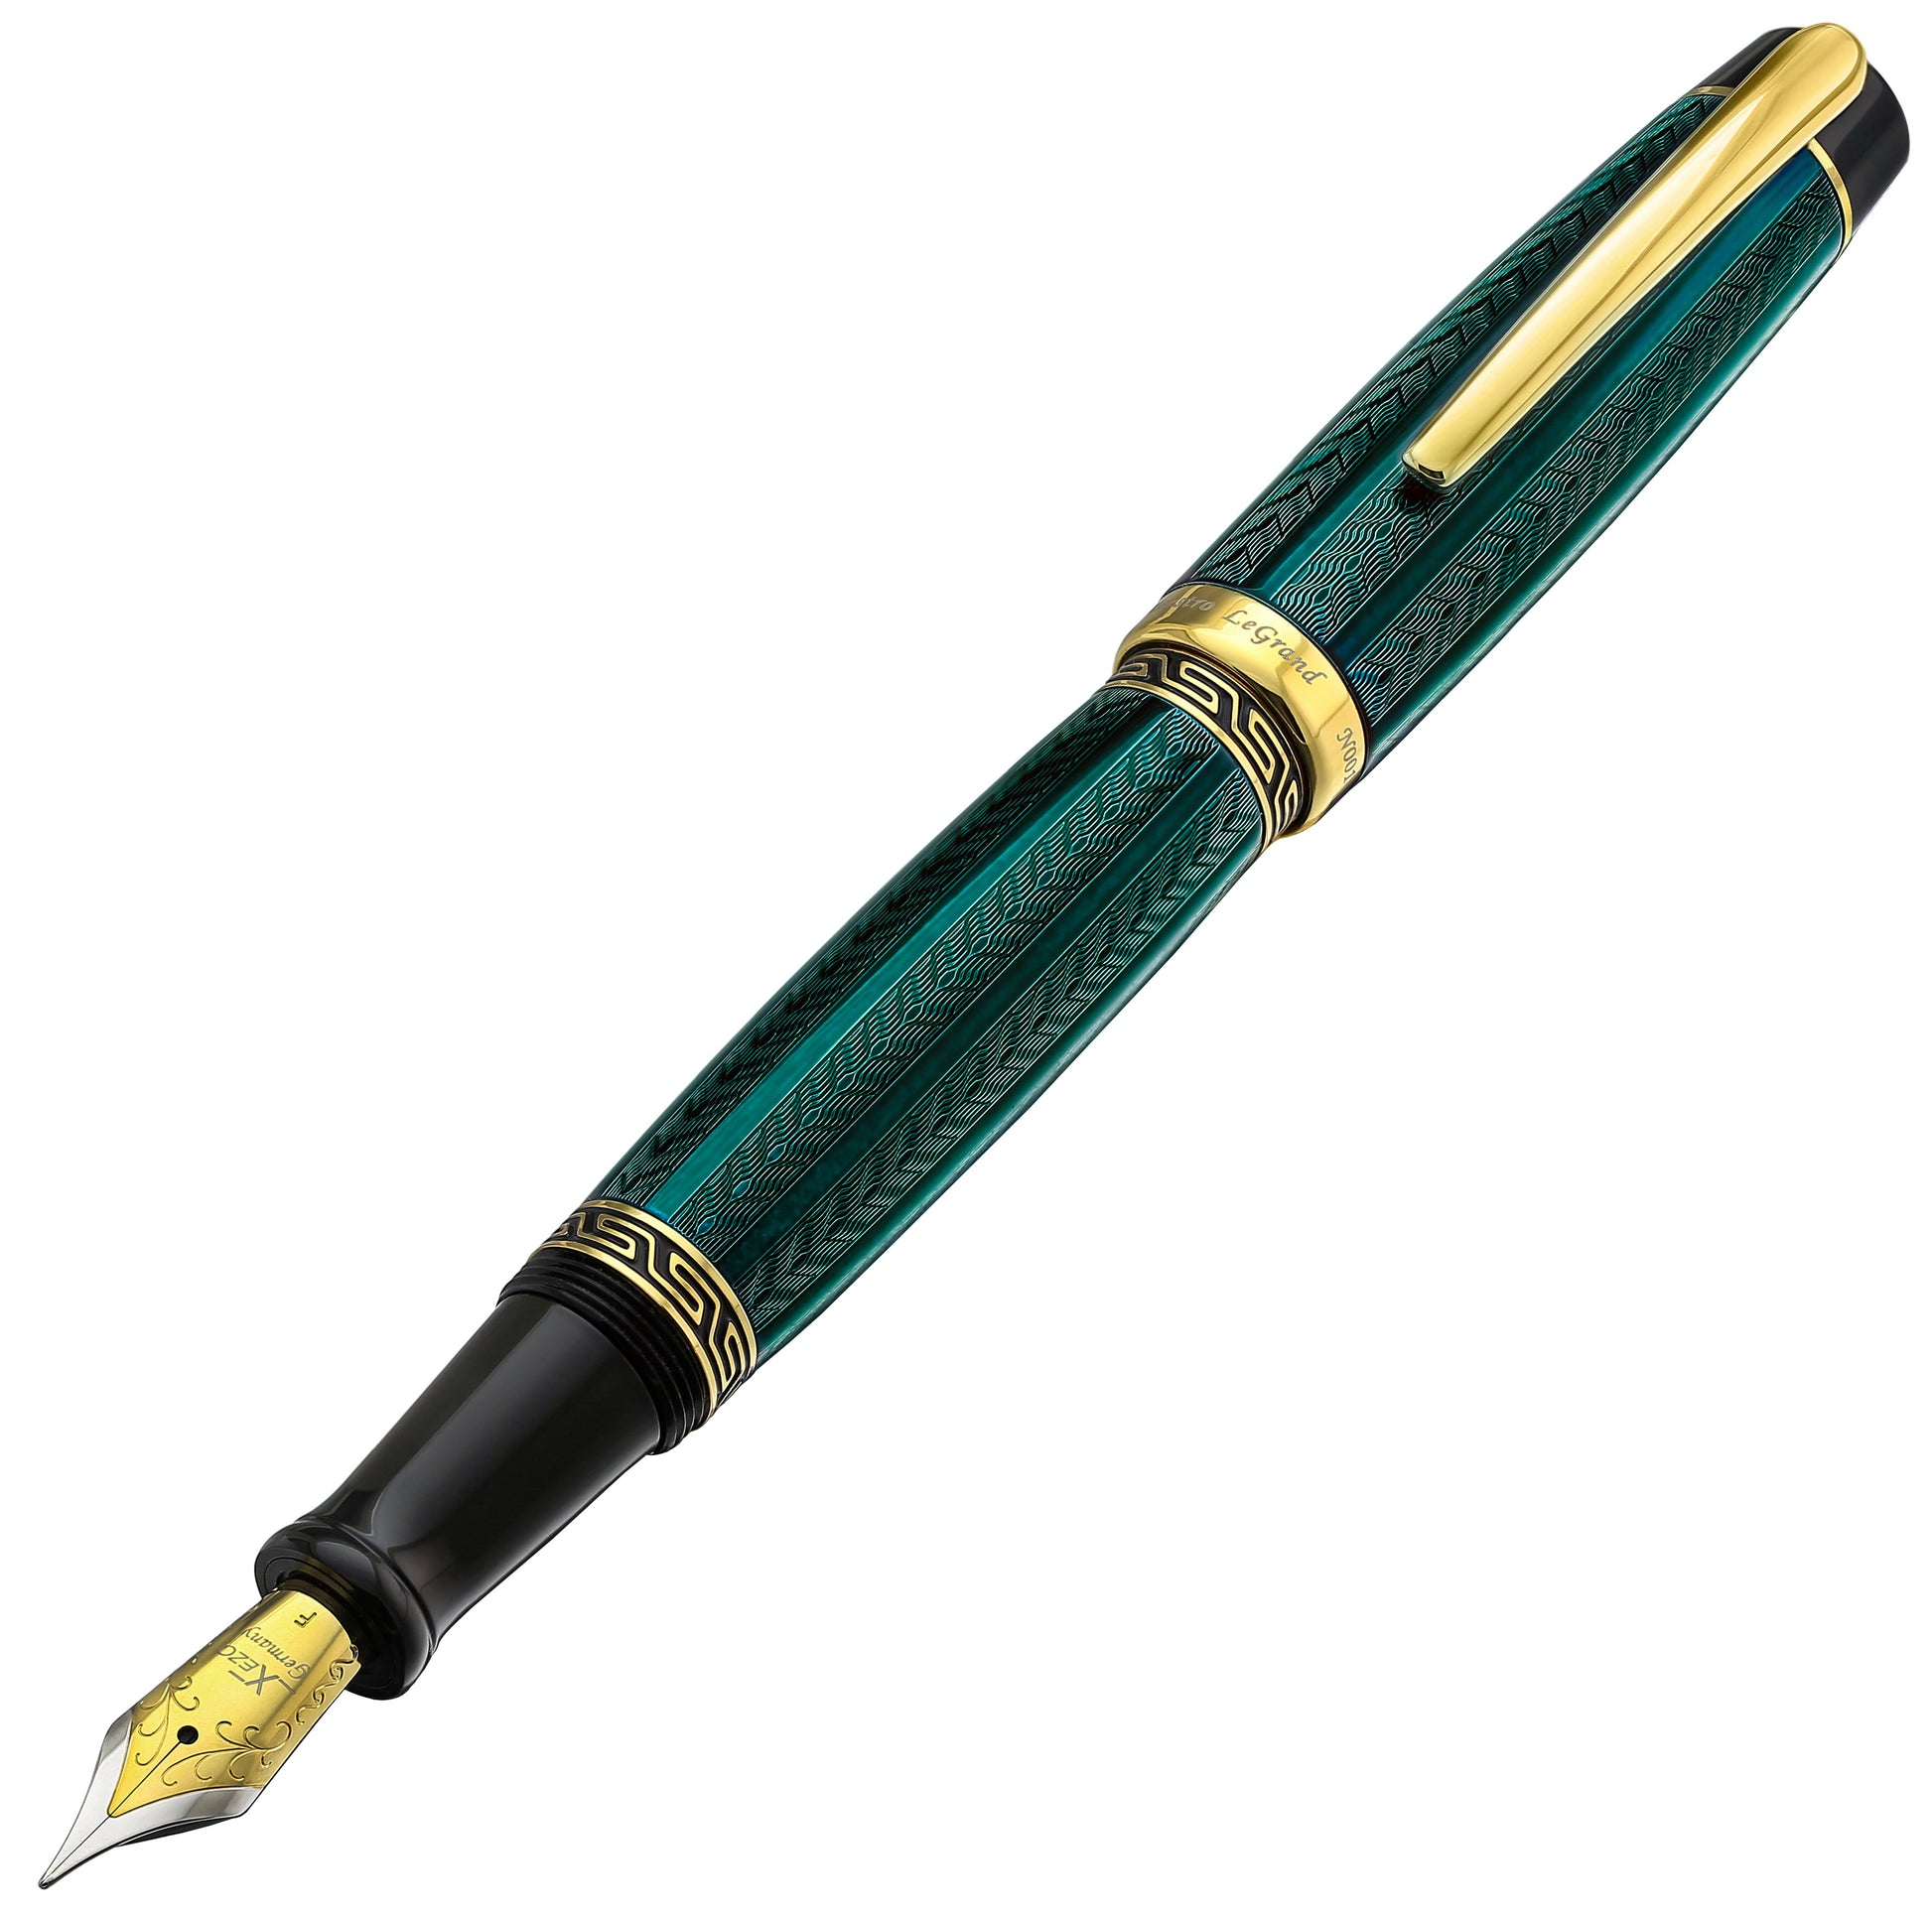 Xezo - Angled view of the front of the Maestro LeGrand Dioptase F fountain pen